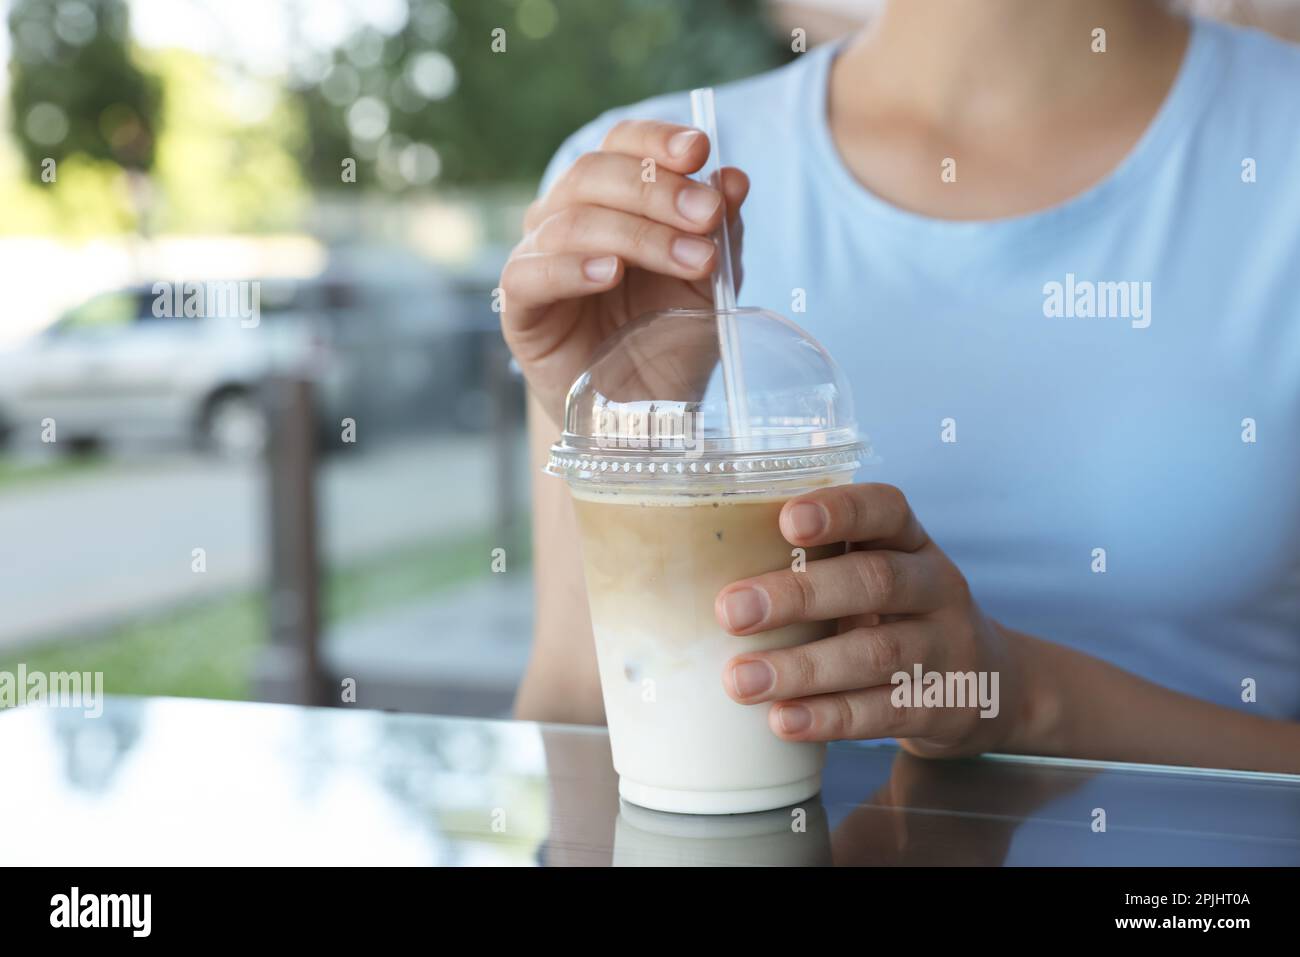 https://c8.alamy.com/comp/2PJHT0A/woman-with-plastic-takeaway-cup-of-delicious-iced-coffee-at-table-in-outdoor-cafe-closeup-2PJHT0A.jpg